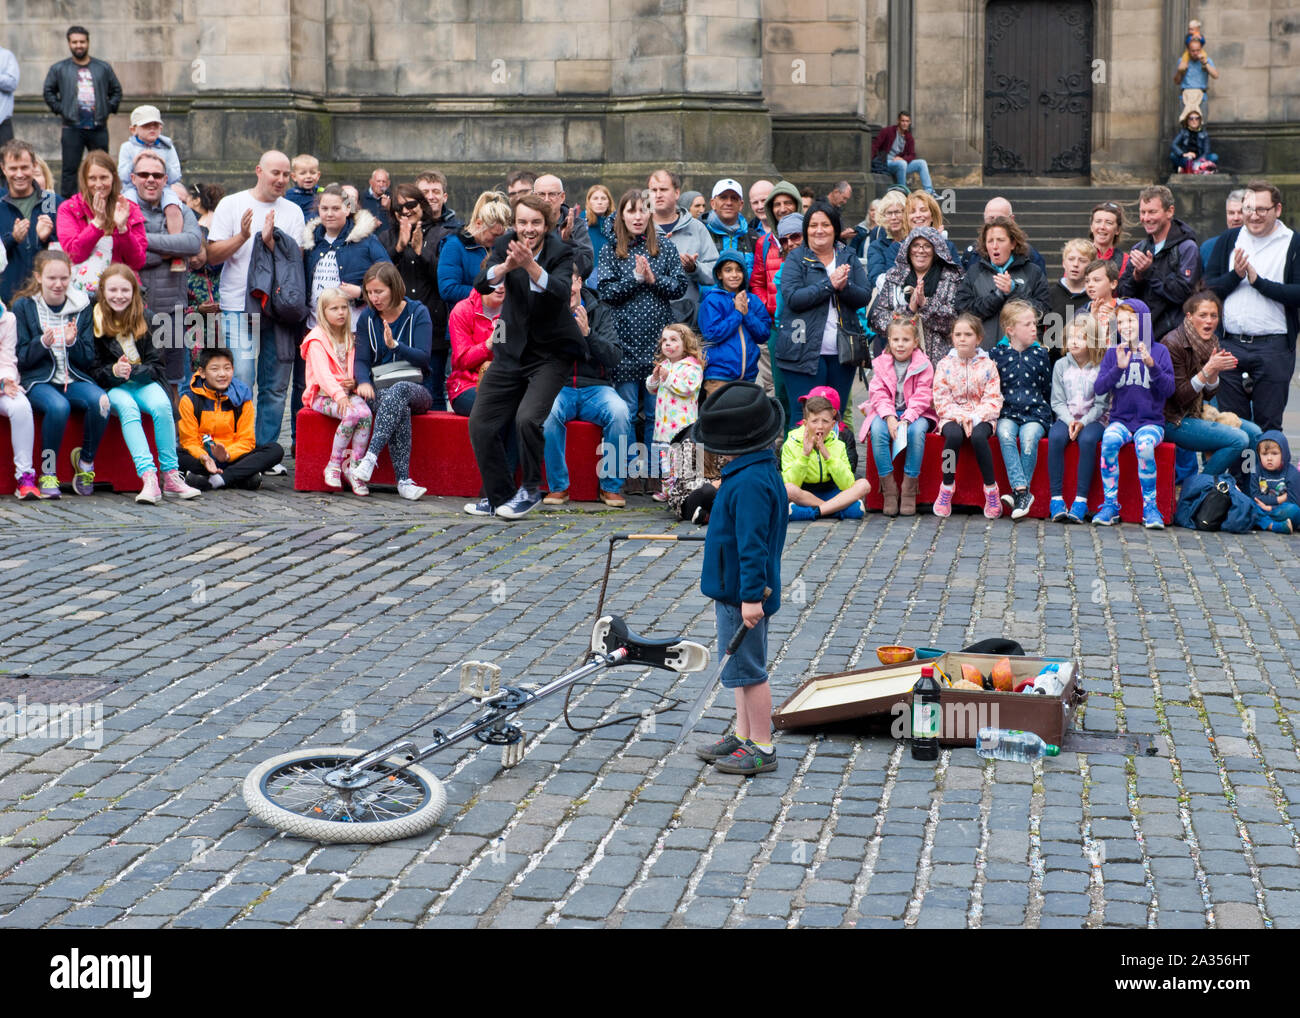 Young boy from audience enjoying taking part in street act. Edinburgh Fringe Festival Stock Photo